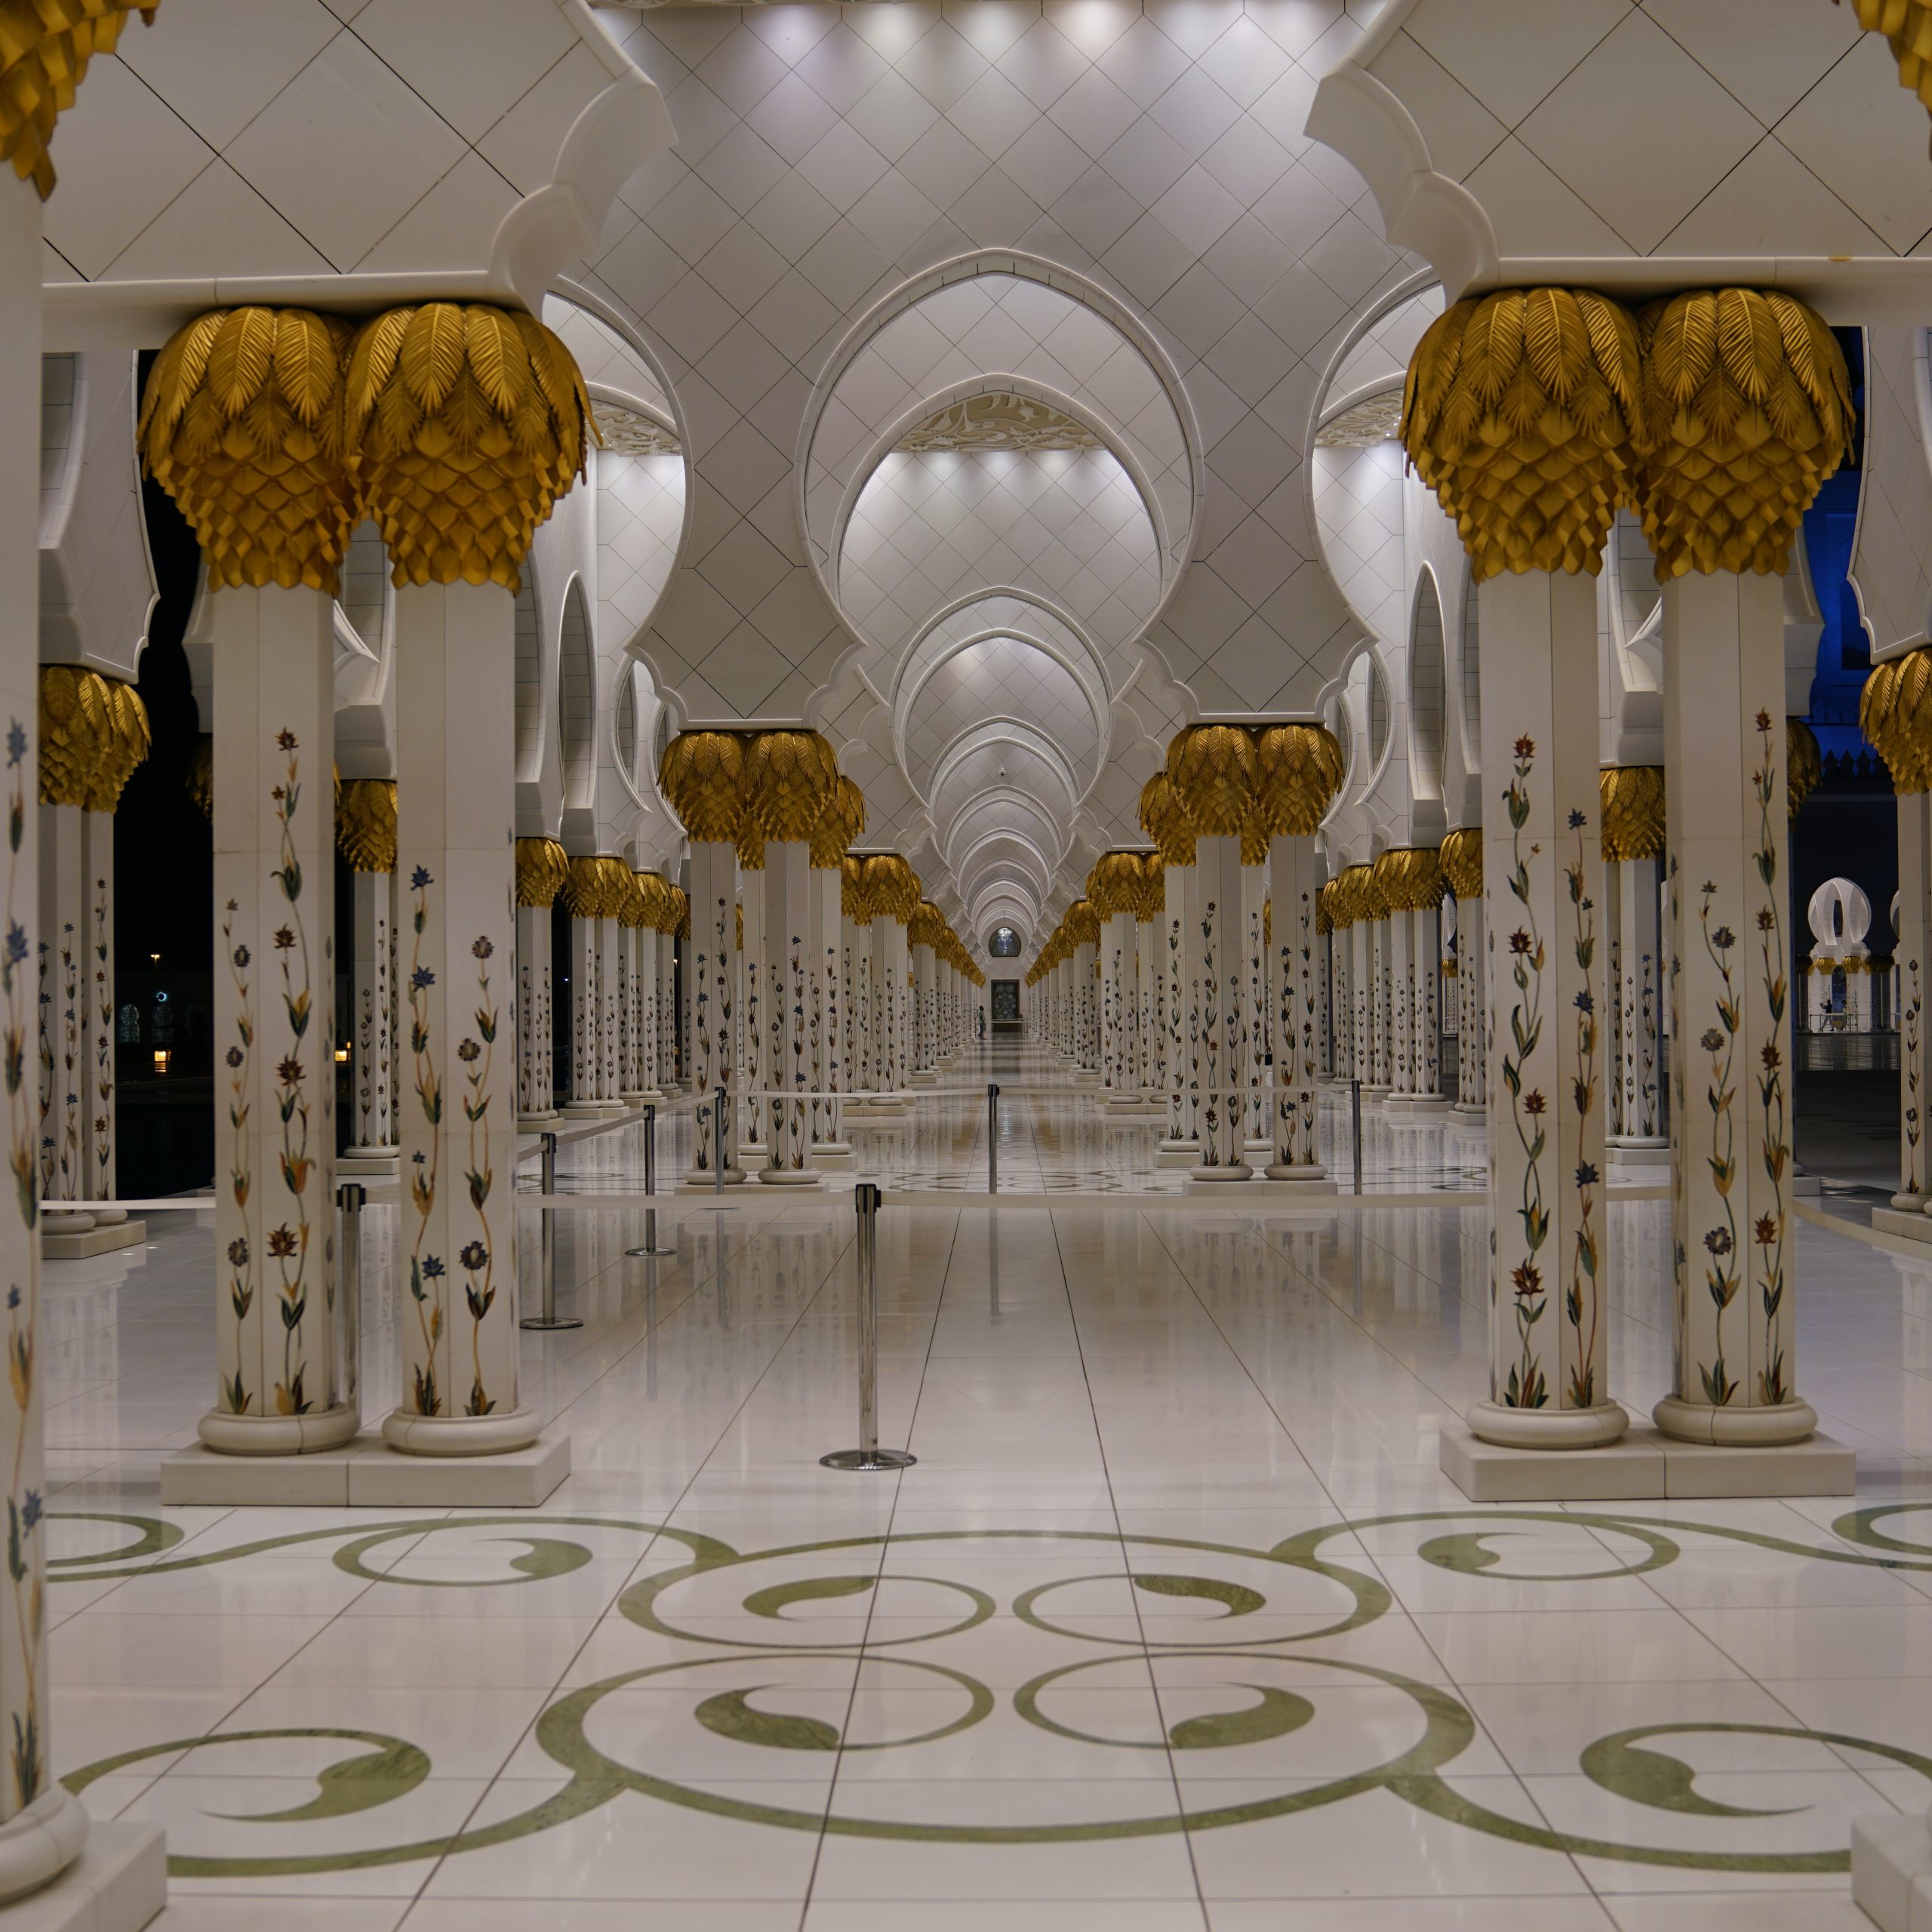 Day 7: Abu Dhabi City Tour with Grand Mosque & Louvre Museum Visit